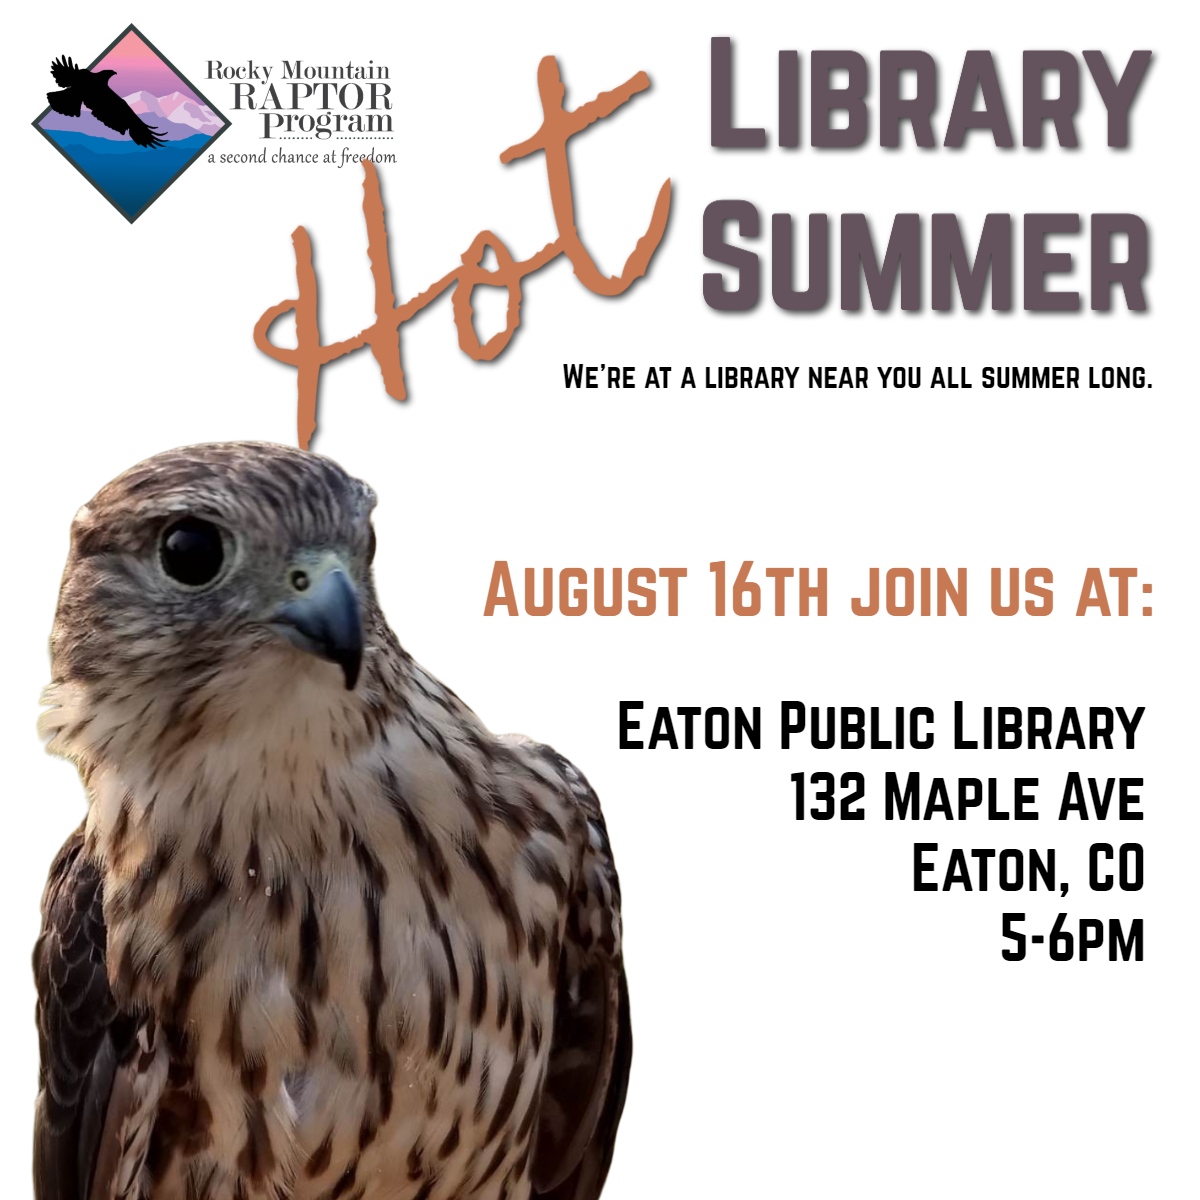 Join us for Hot Library Summer in at the Eaton Public Library tomorrow from 5-6!!
#summervibes #freeprogram #rmrp